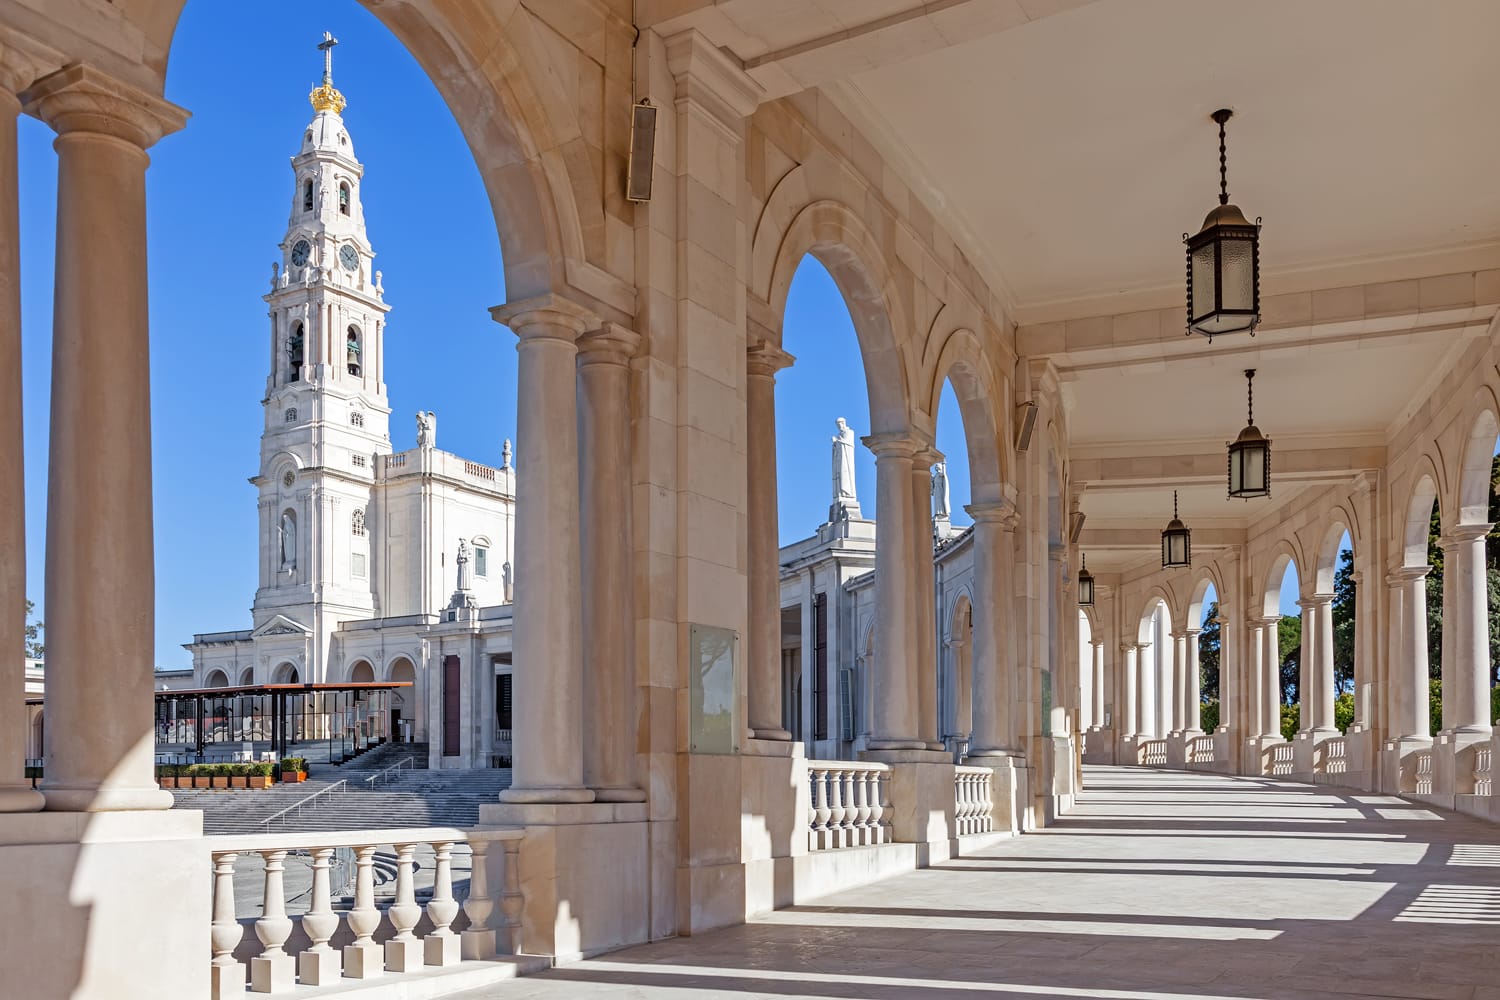 Sanctuary of Fatima, Portugal. Basilica of Our Lady of the Rosary seen from and through the colonnade. One of the most important Marian Shrines and pilgrimage locations for Catholics